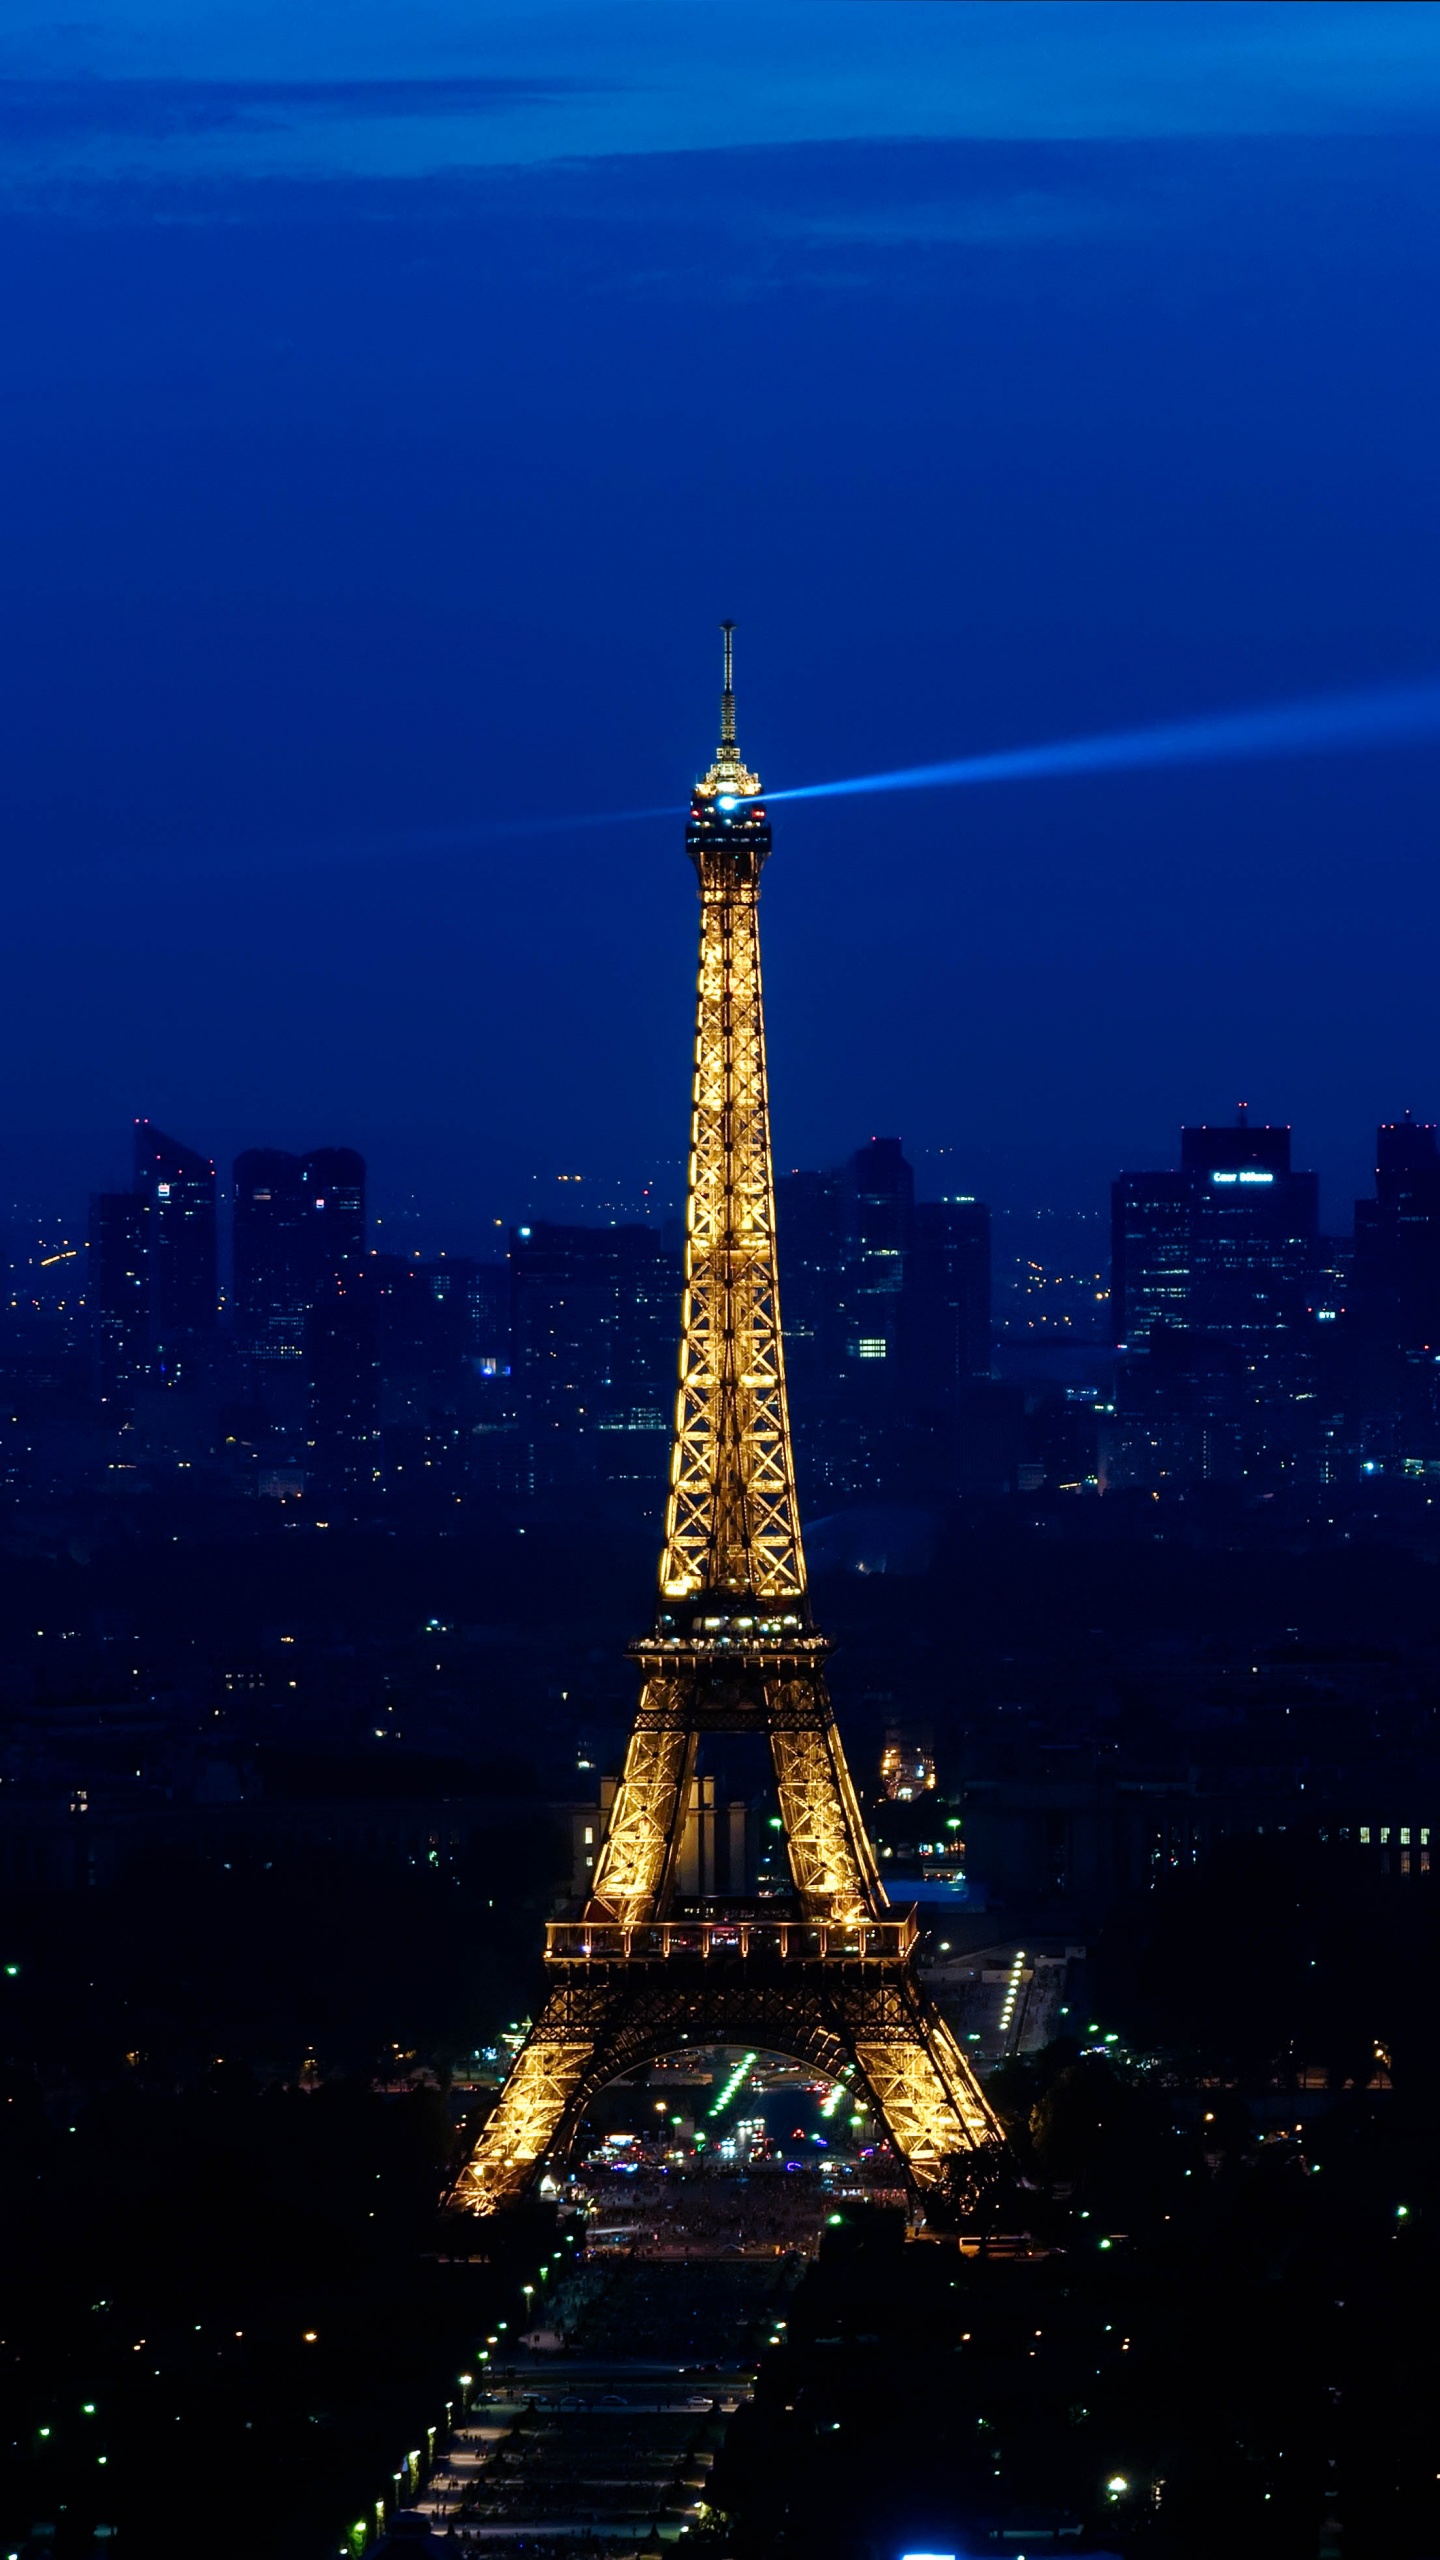 Download Eiffel Tower Wallpaper PARIS 1.0.0(1000).apk for Android - apkdl.in